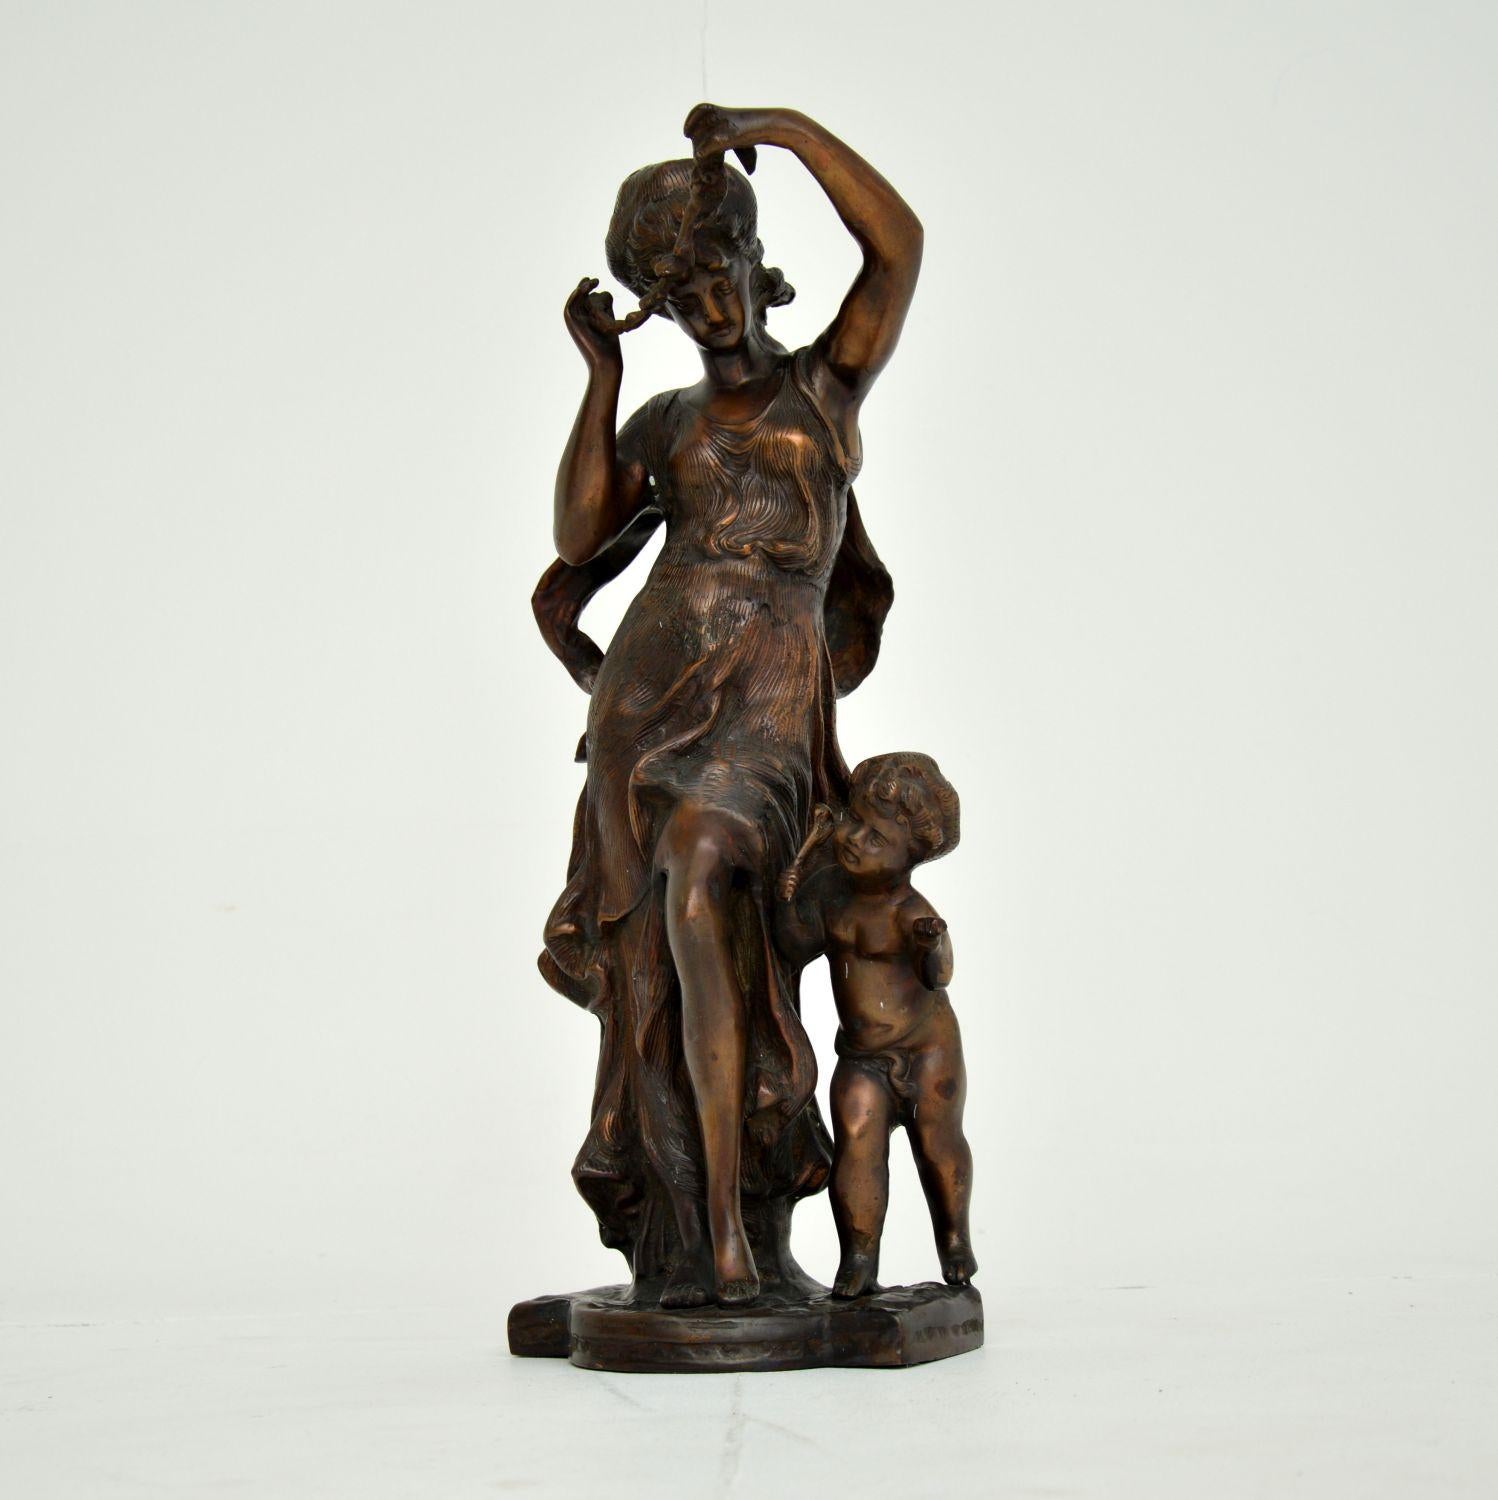 A lovely antique bronze sculpture, depicting a woman and child from classical times. This was likely made in central Europe around the 1930-50’s period.

It is nicely cast with intricate details, and is an impressive size. The bronze has acquired